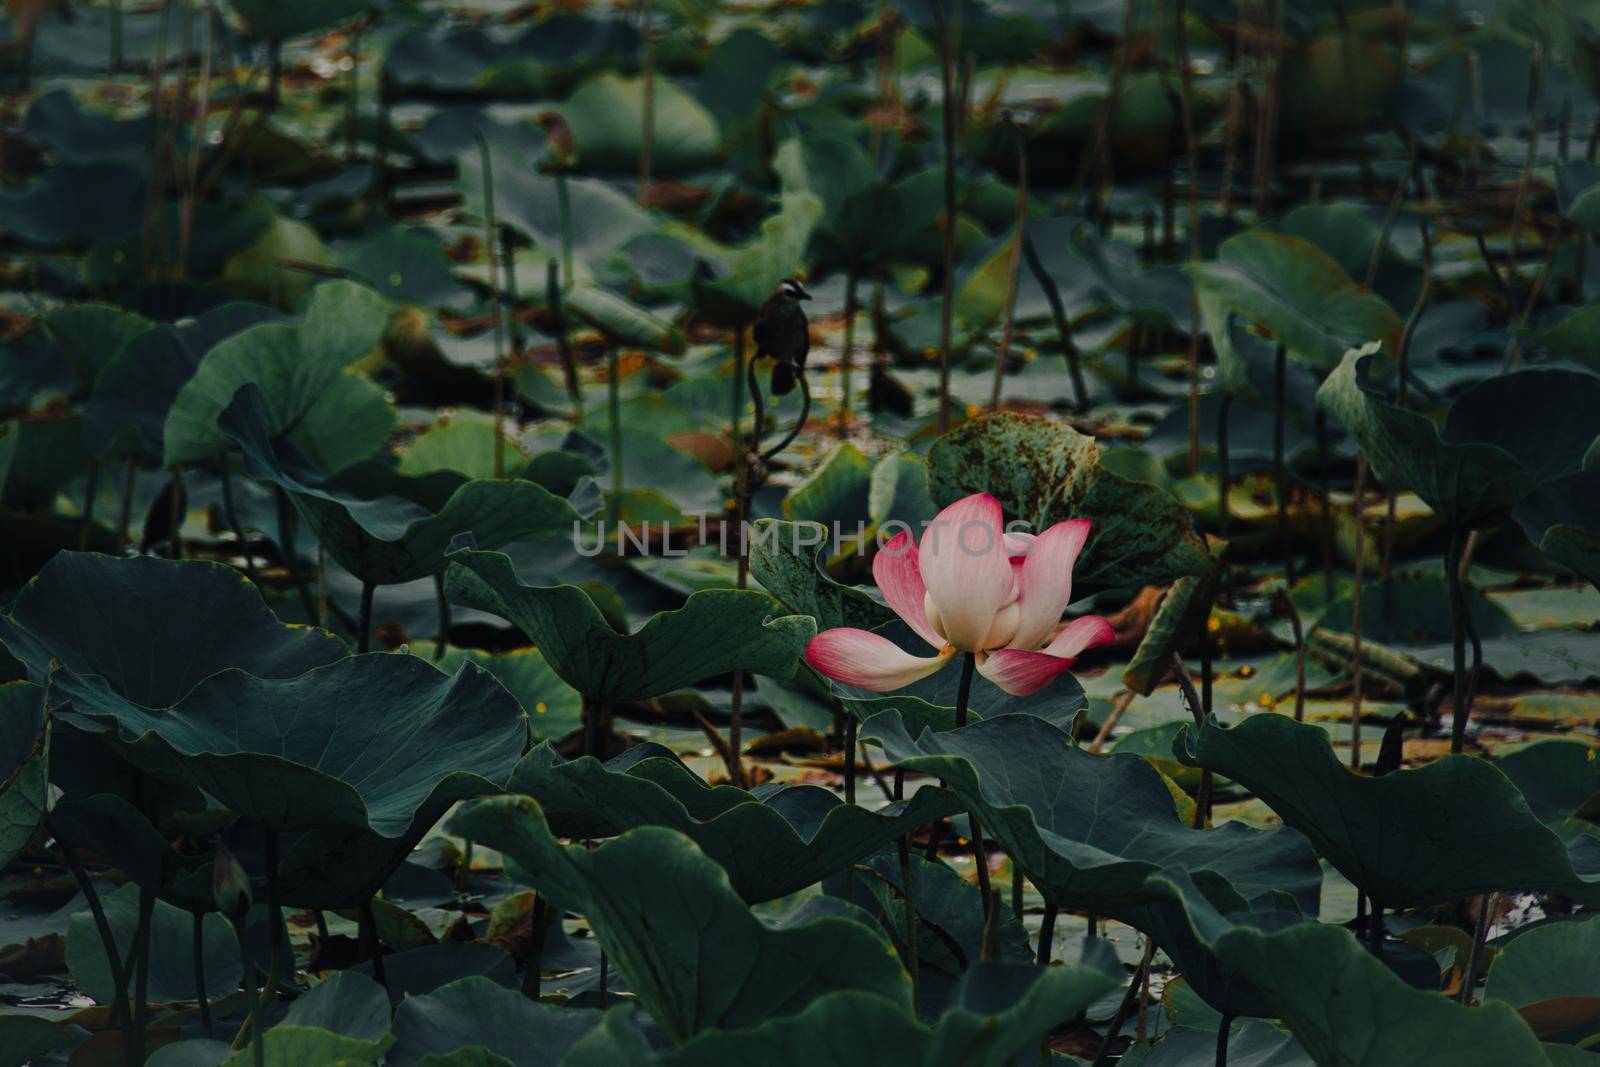 Lotus flower or Nelumbo nucifera in a pond of gently swaying leaves showing the concept of spring mindfulness and wellness